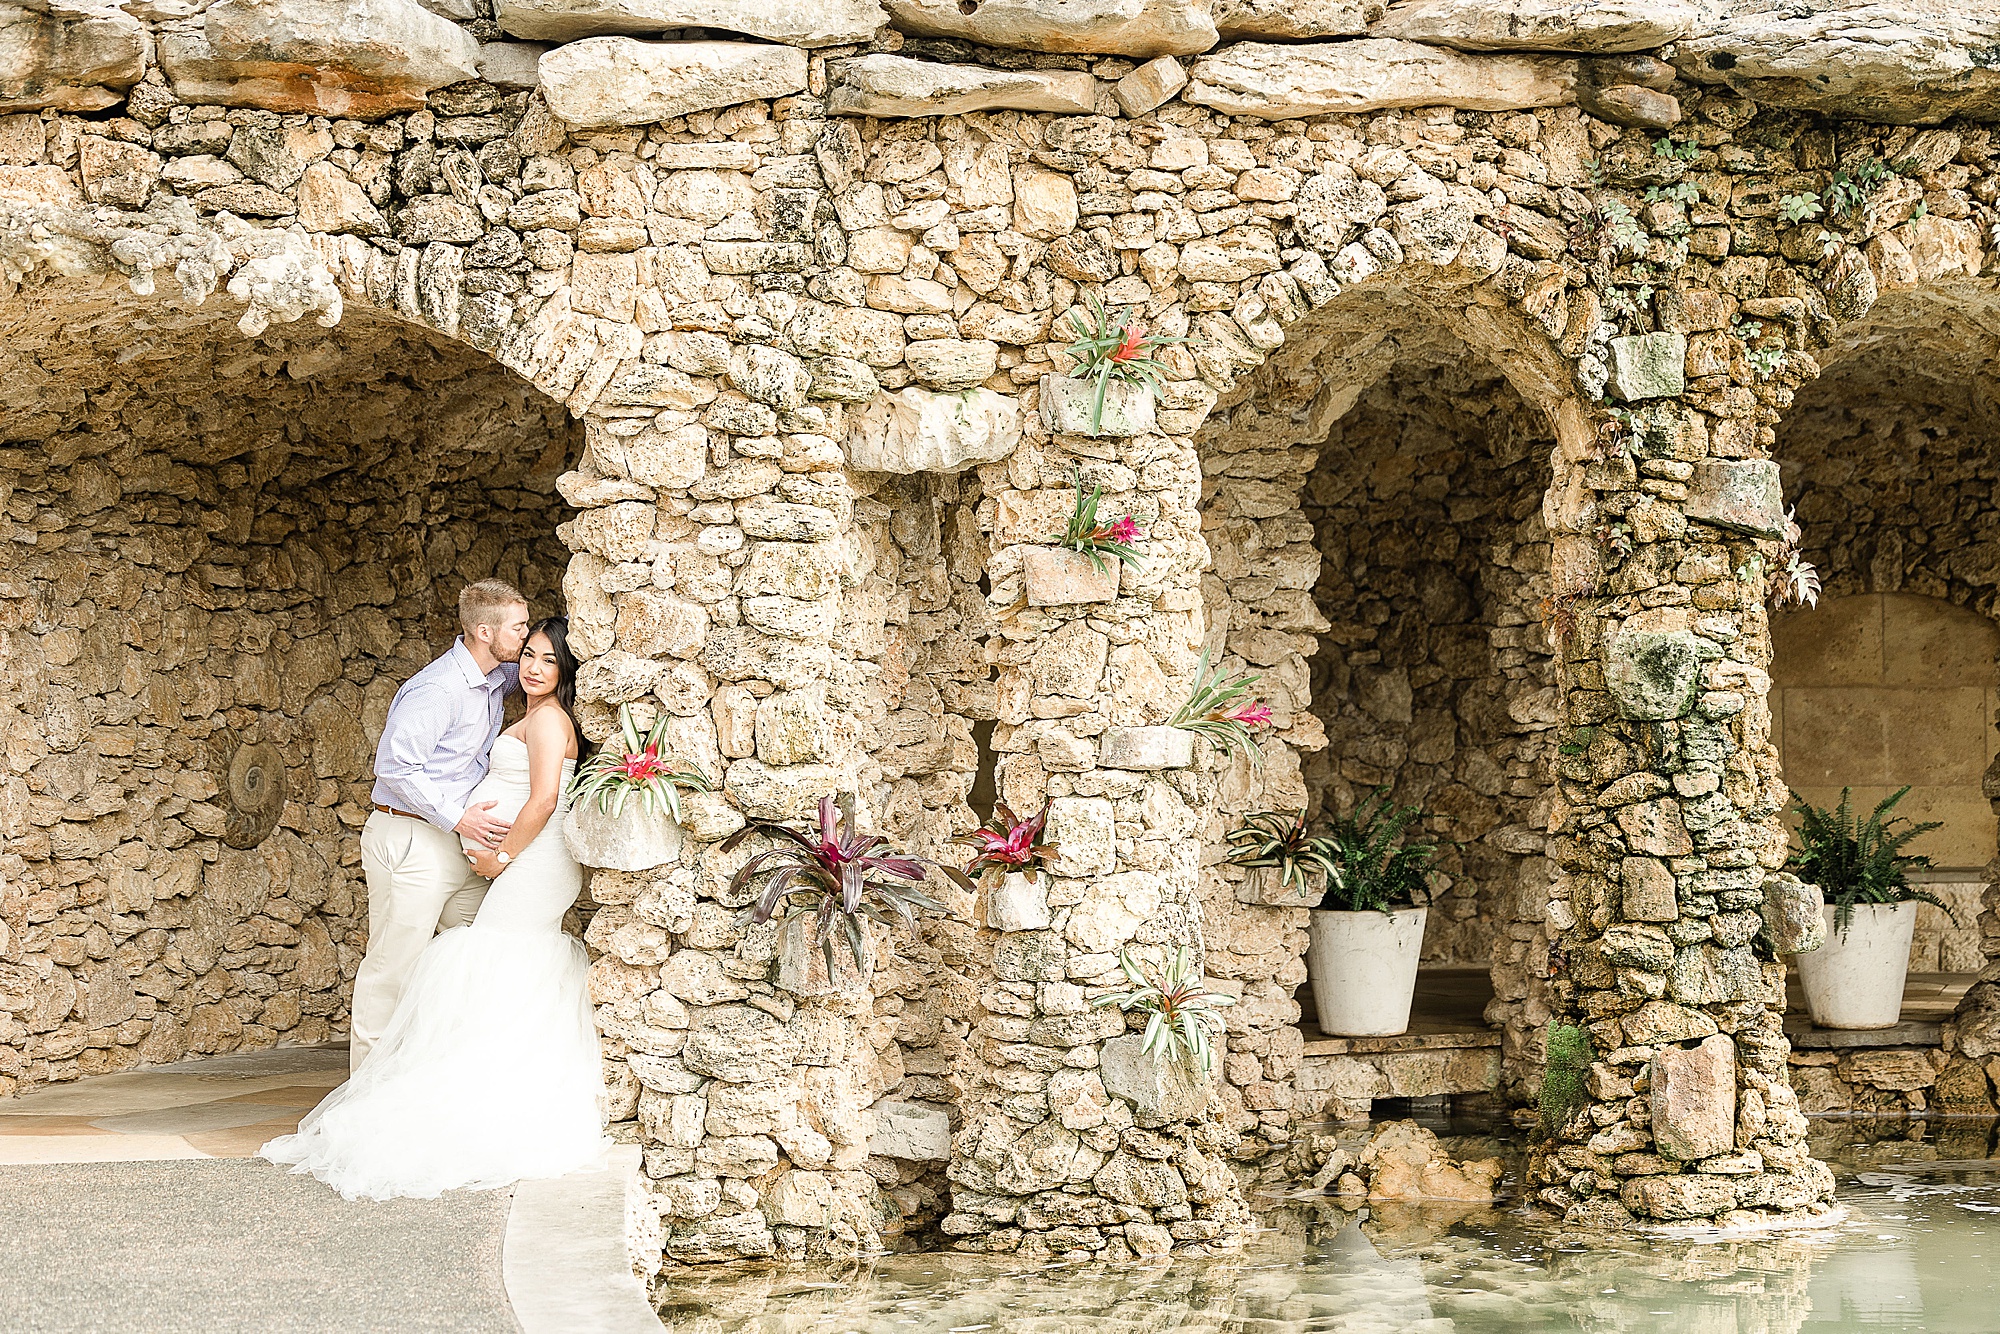 couple poses in grotto of Dallas Arboretum during maternity photos